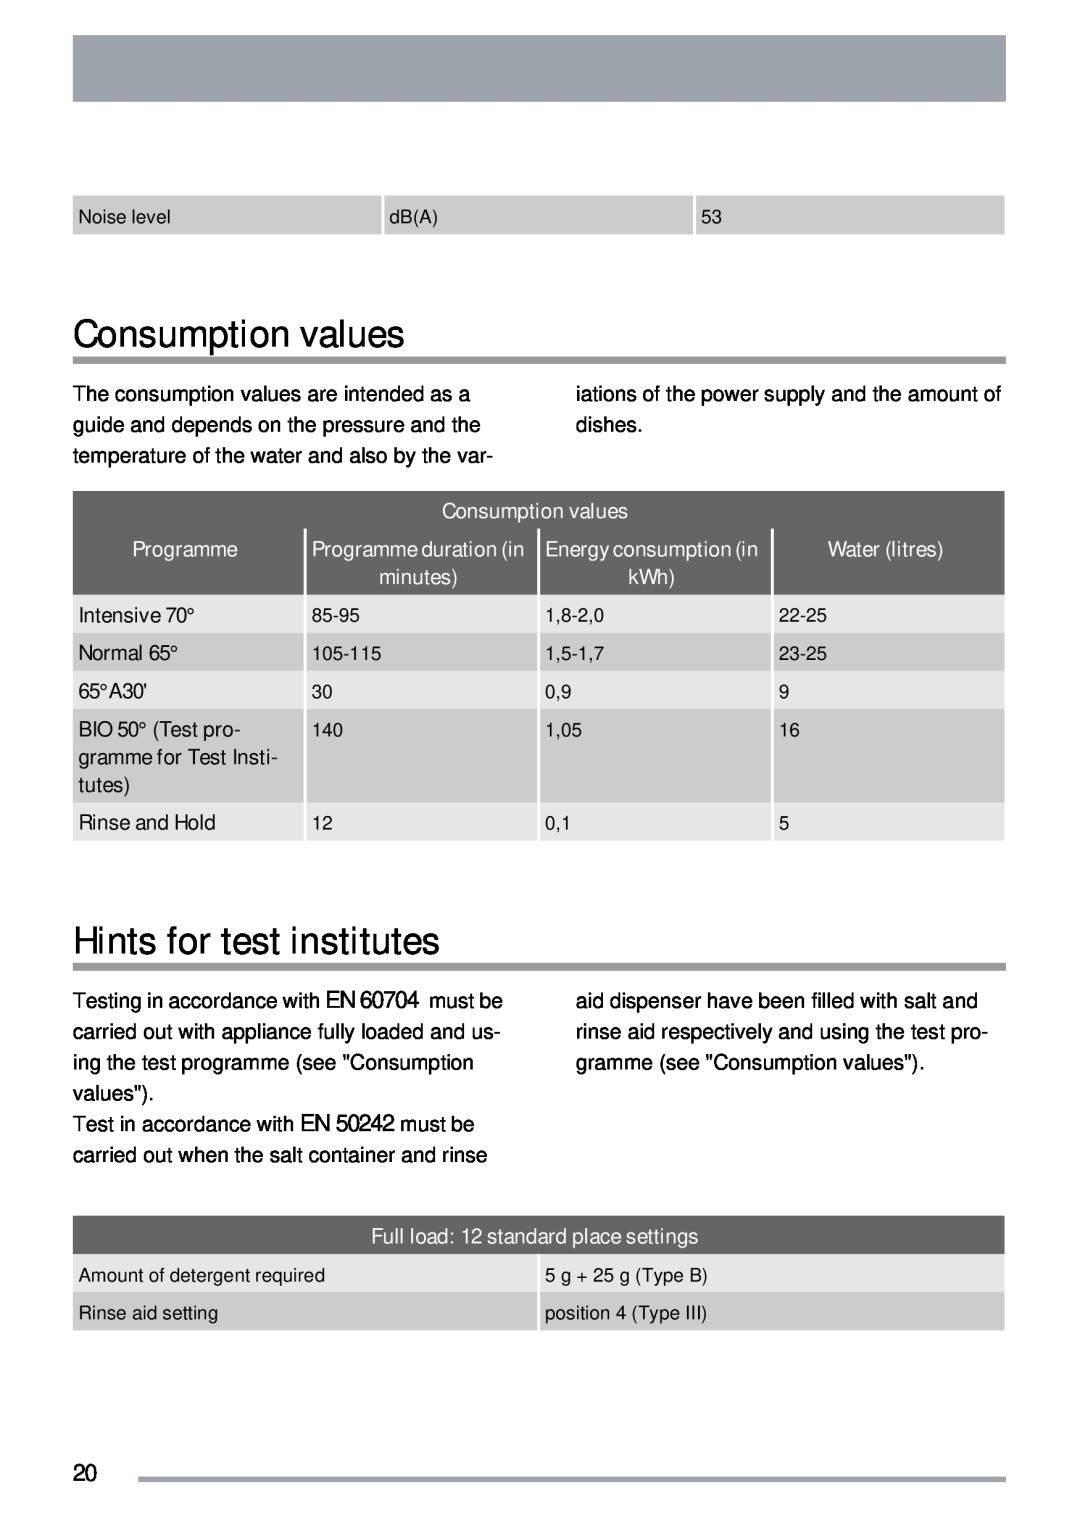 Zanussi ZDI 122 Consumption values, Hints for test institutes, Programme, Water litres, minutes, Intensive, Normal, 65A30 